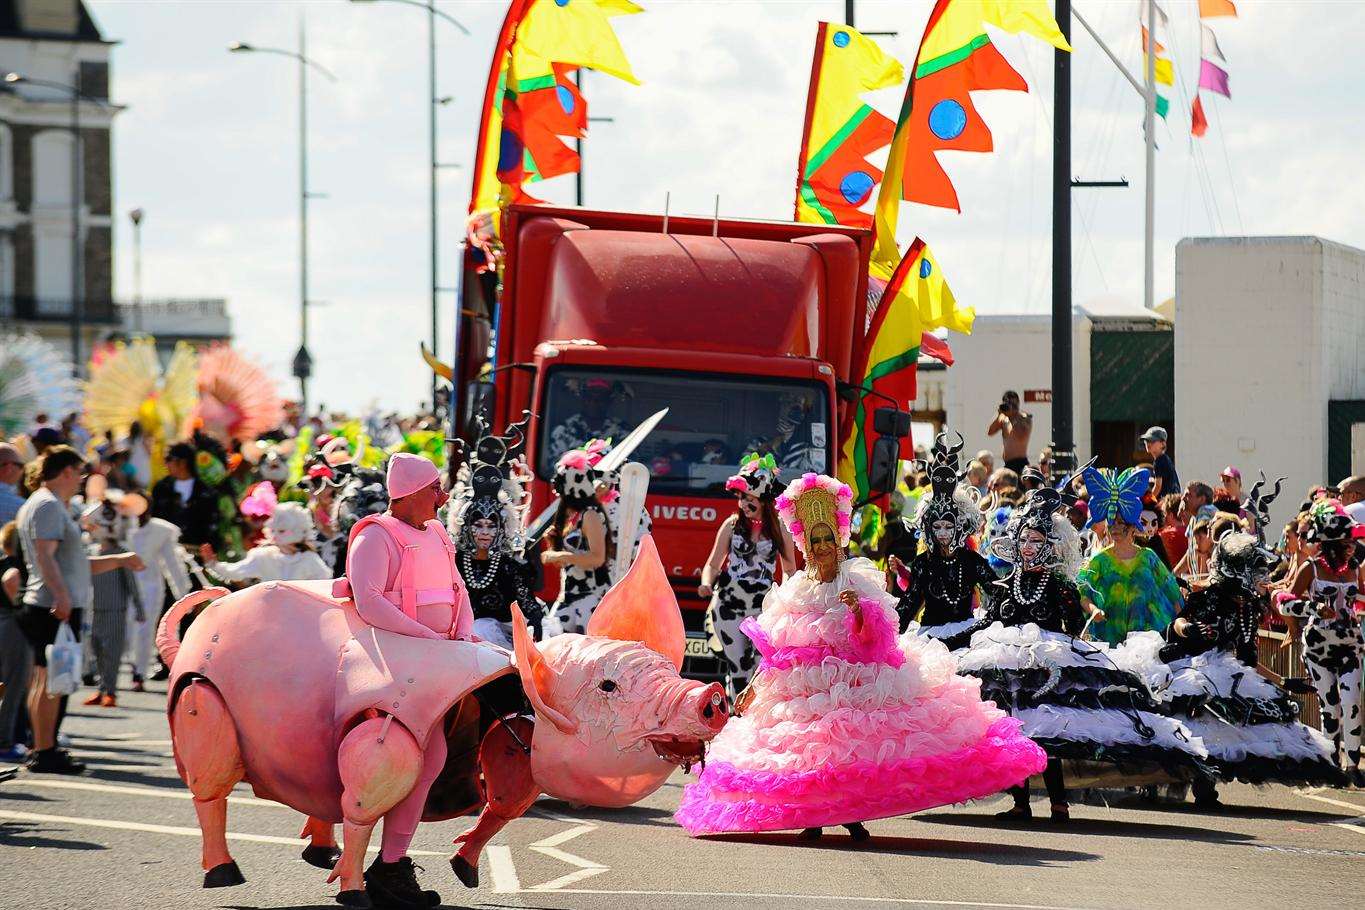 Dozens of decorated floats and costumed walkers joined the parade through Margate